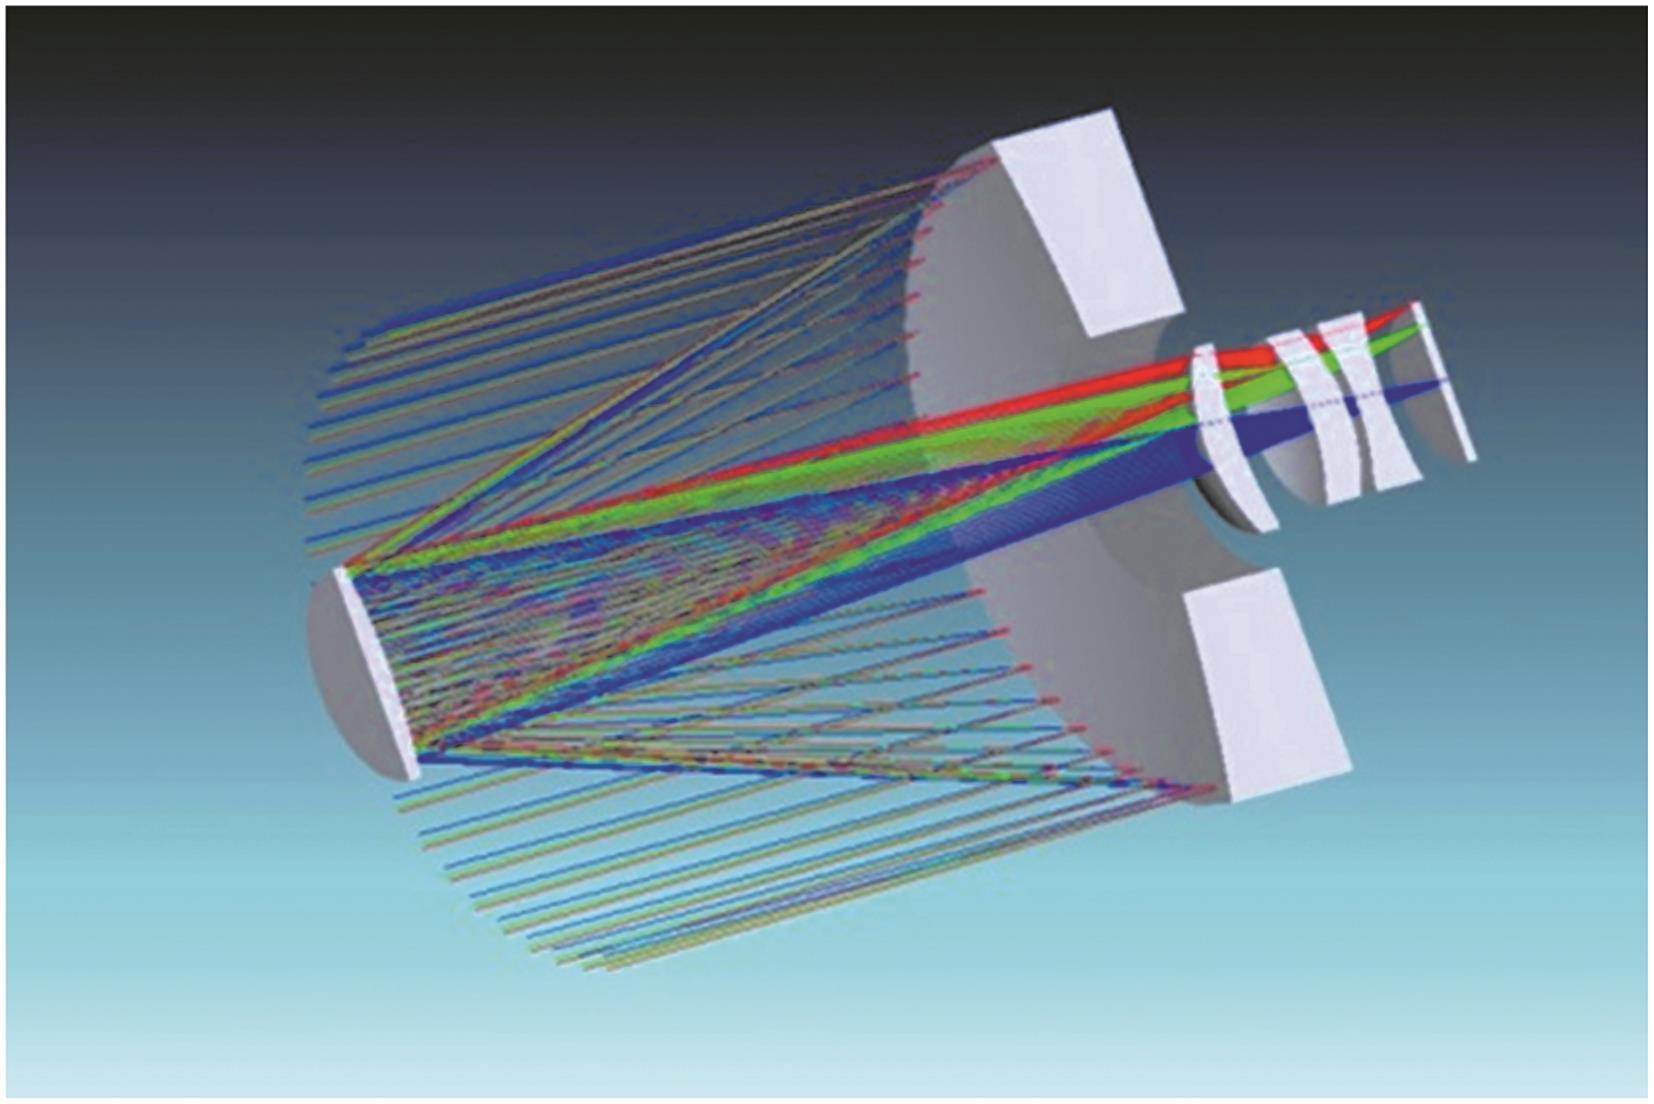 Optical structure used for verification